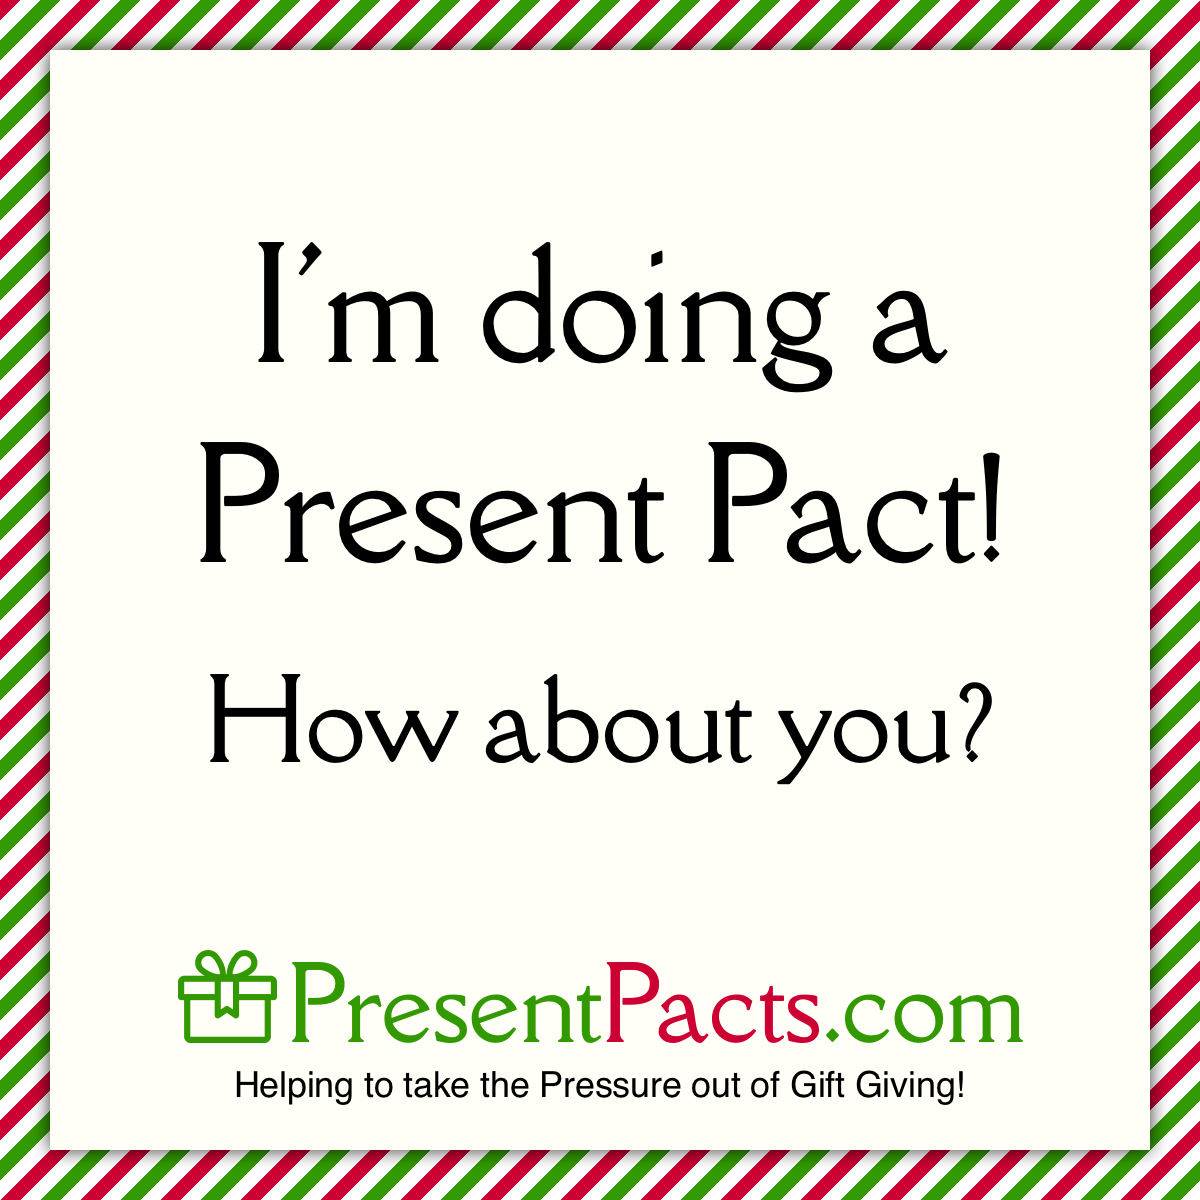 Present Pacts Share image - I'm doing a Present Pact! How about you?